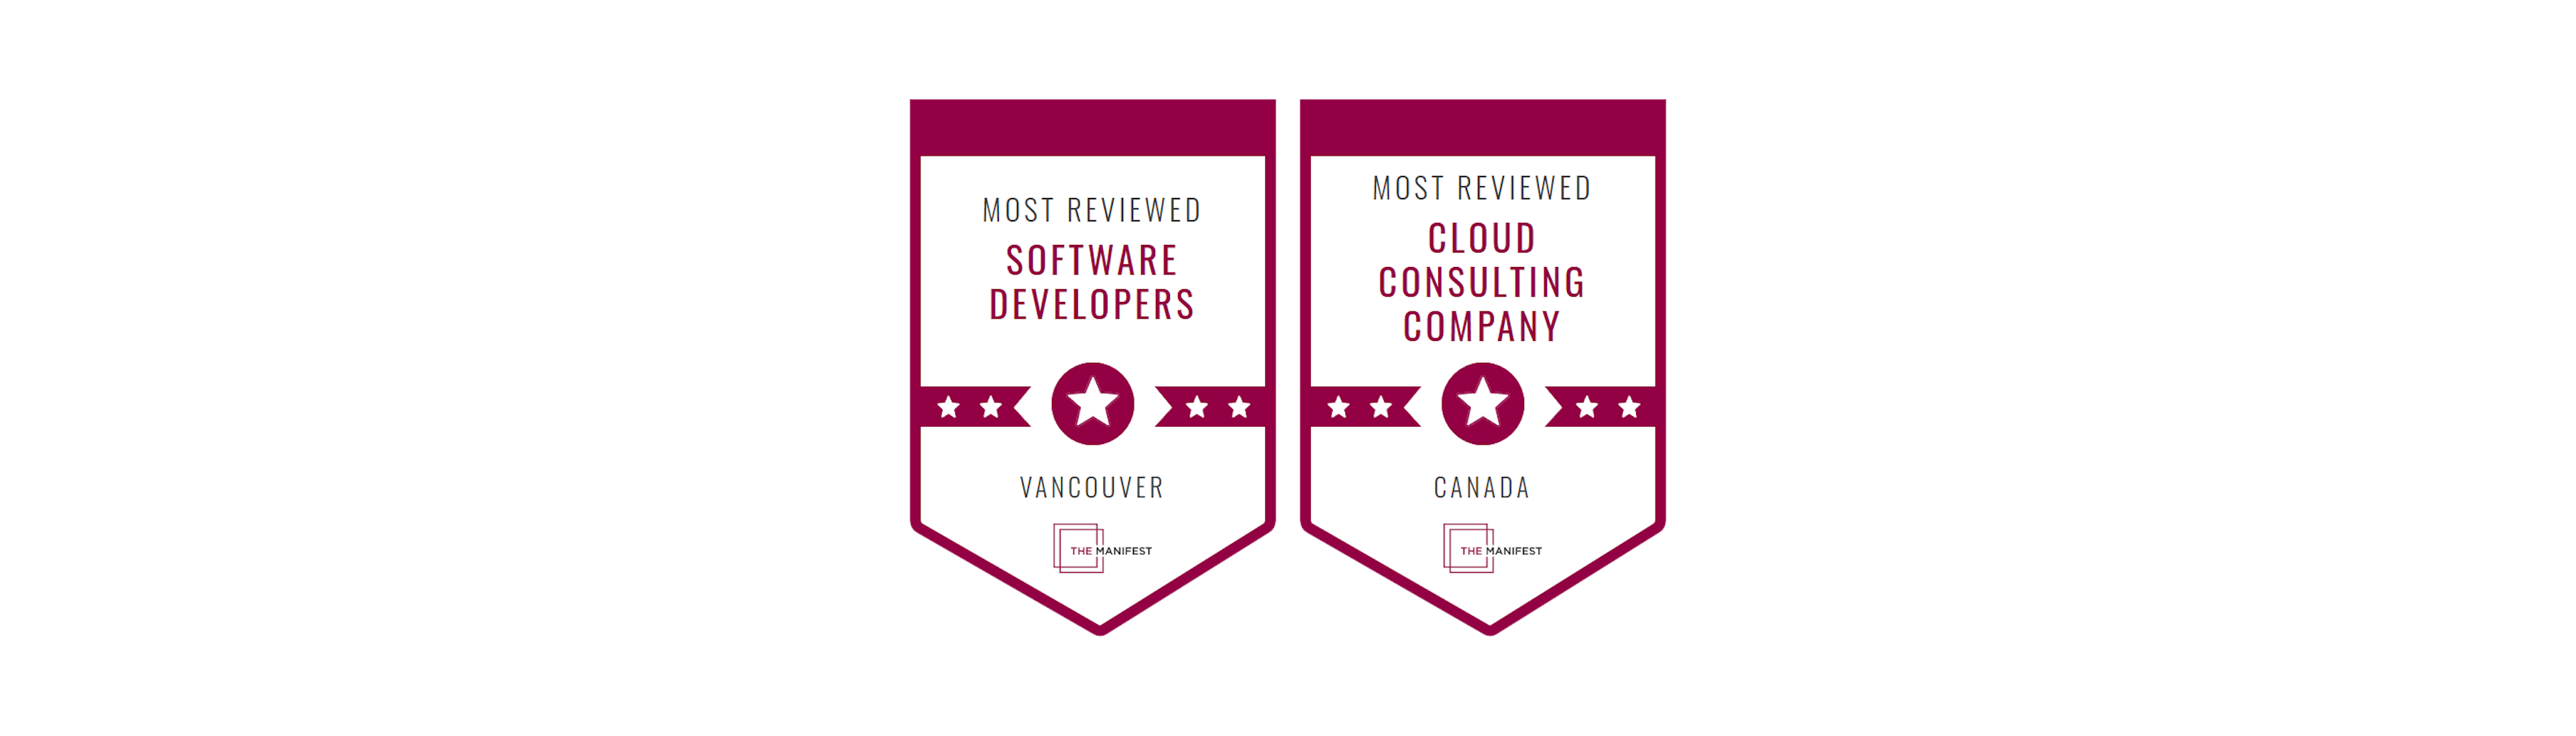 Aligned has been publicly recognized by clients as one of the top cloud consulting and software development companies in Canada in 2023, as verified by The Manifest.